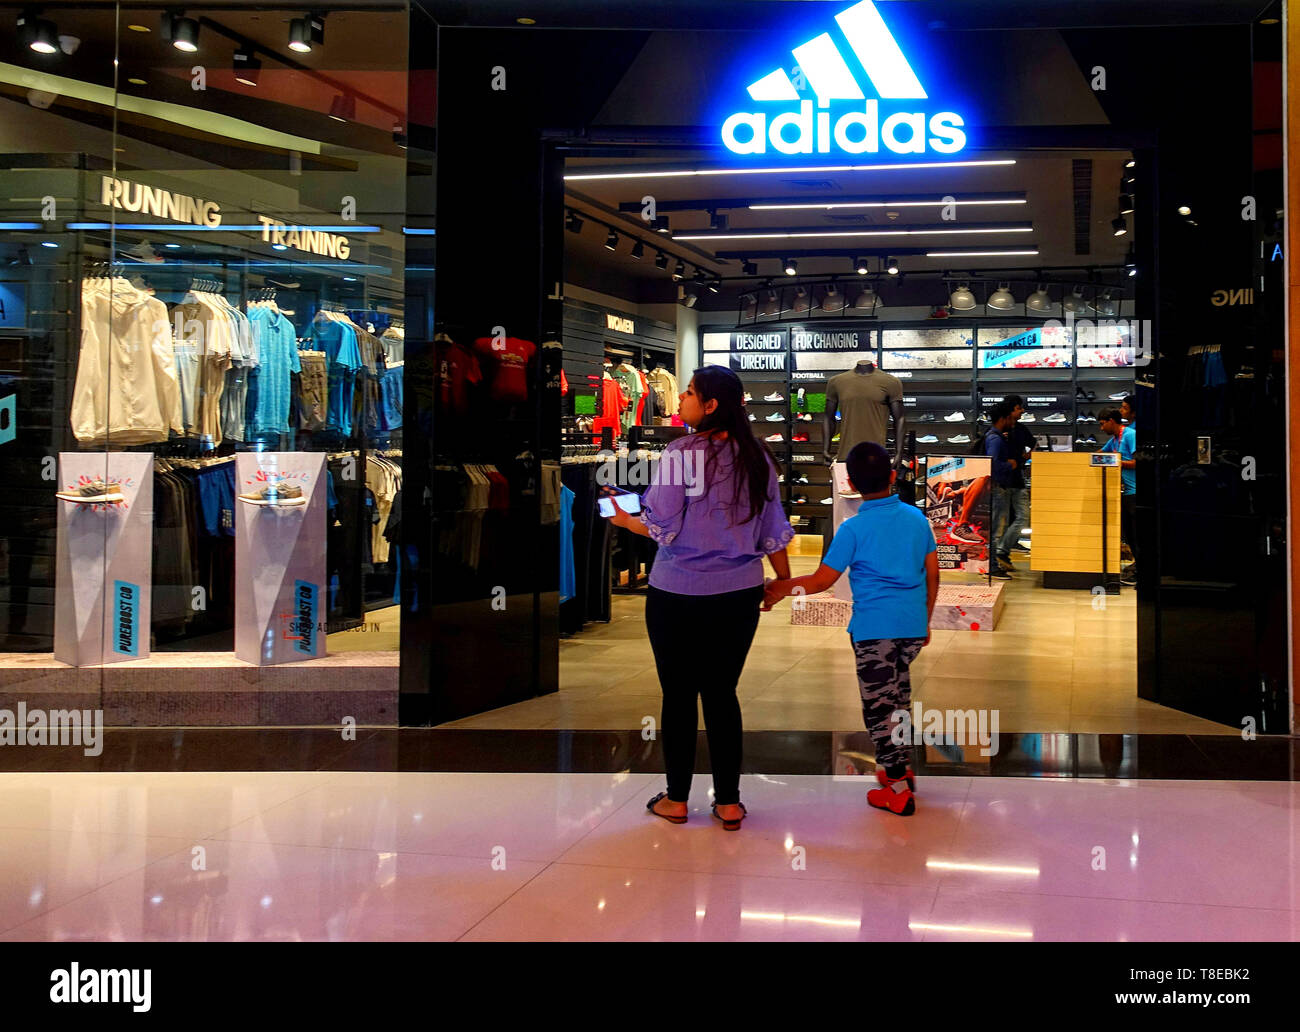 Adidas Store Front High Resolution 